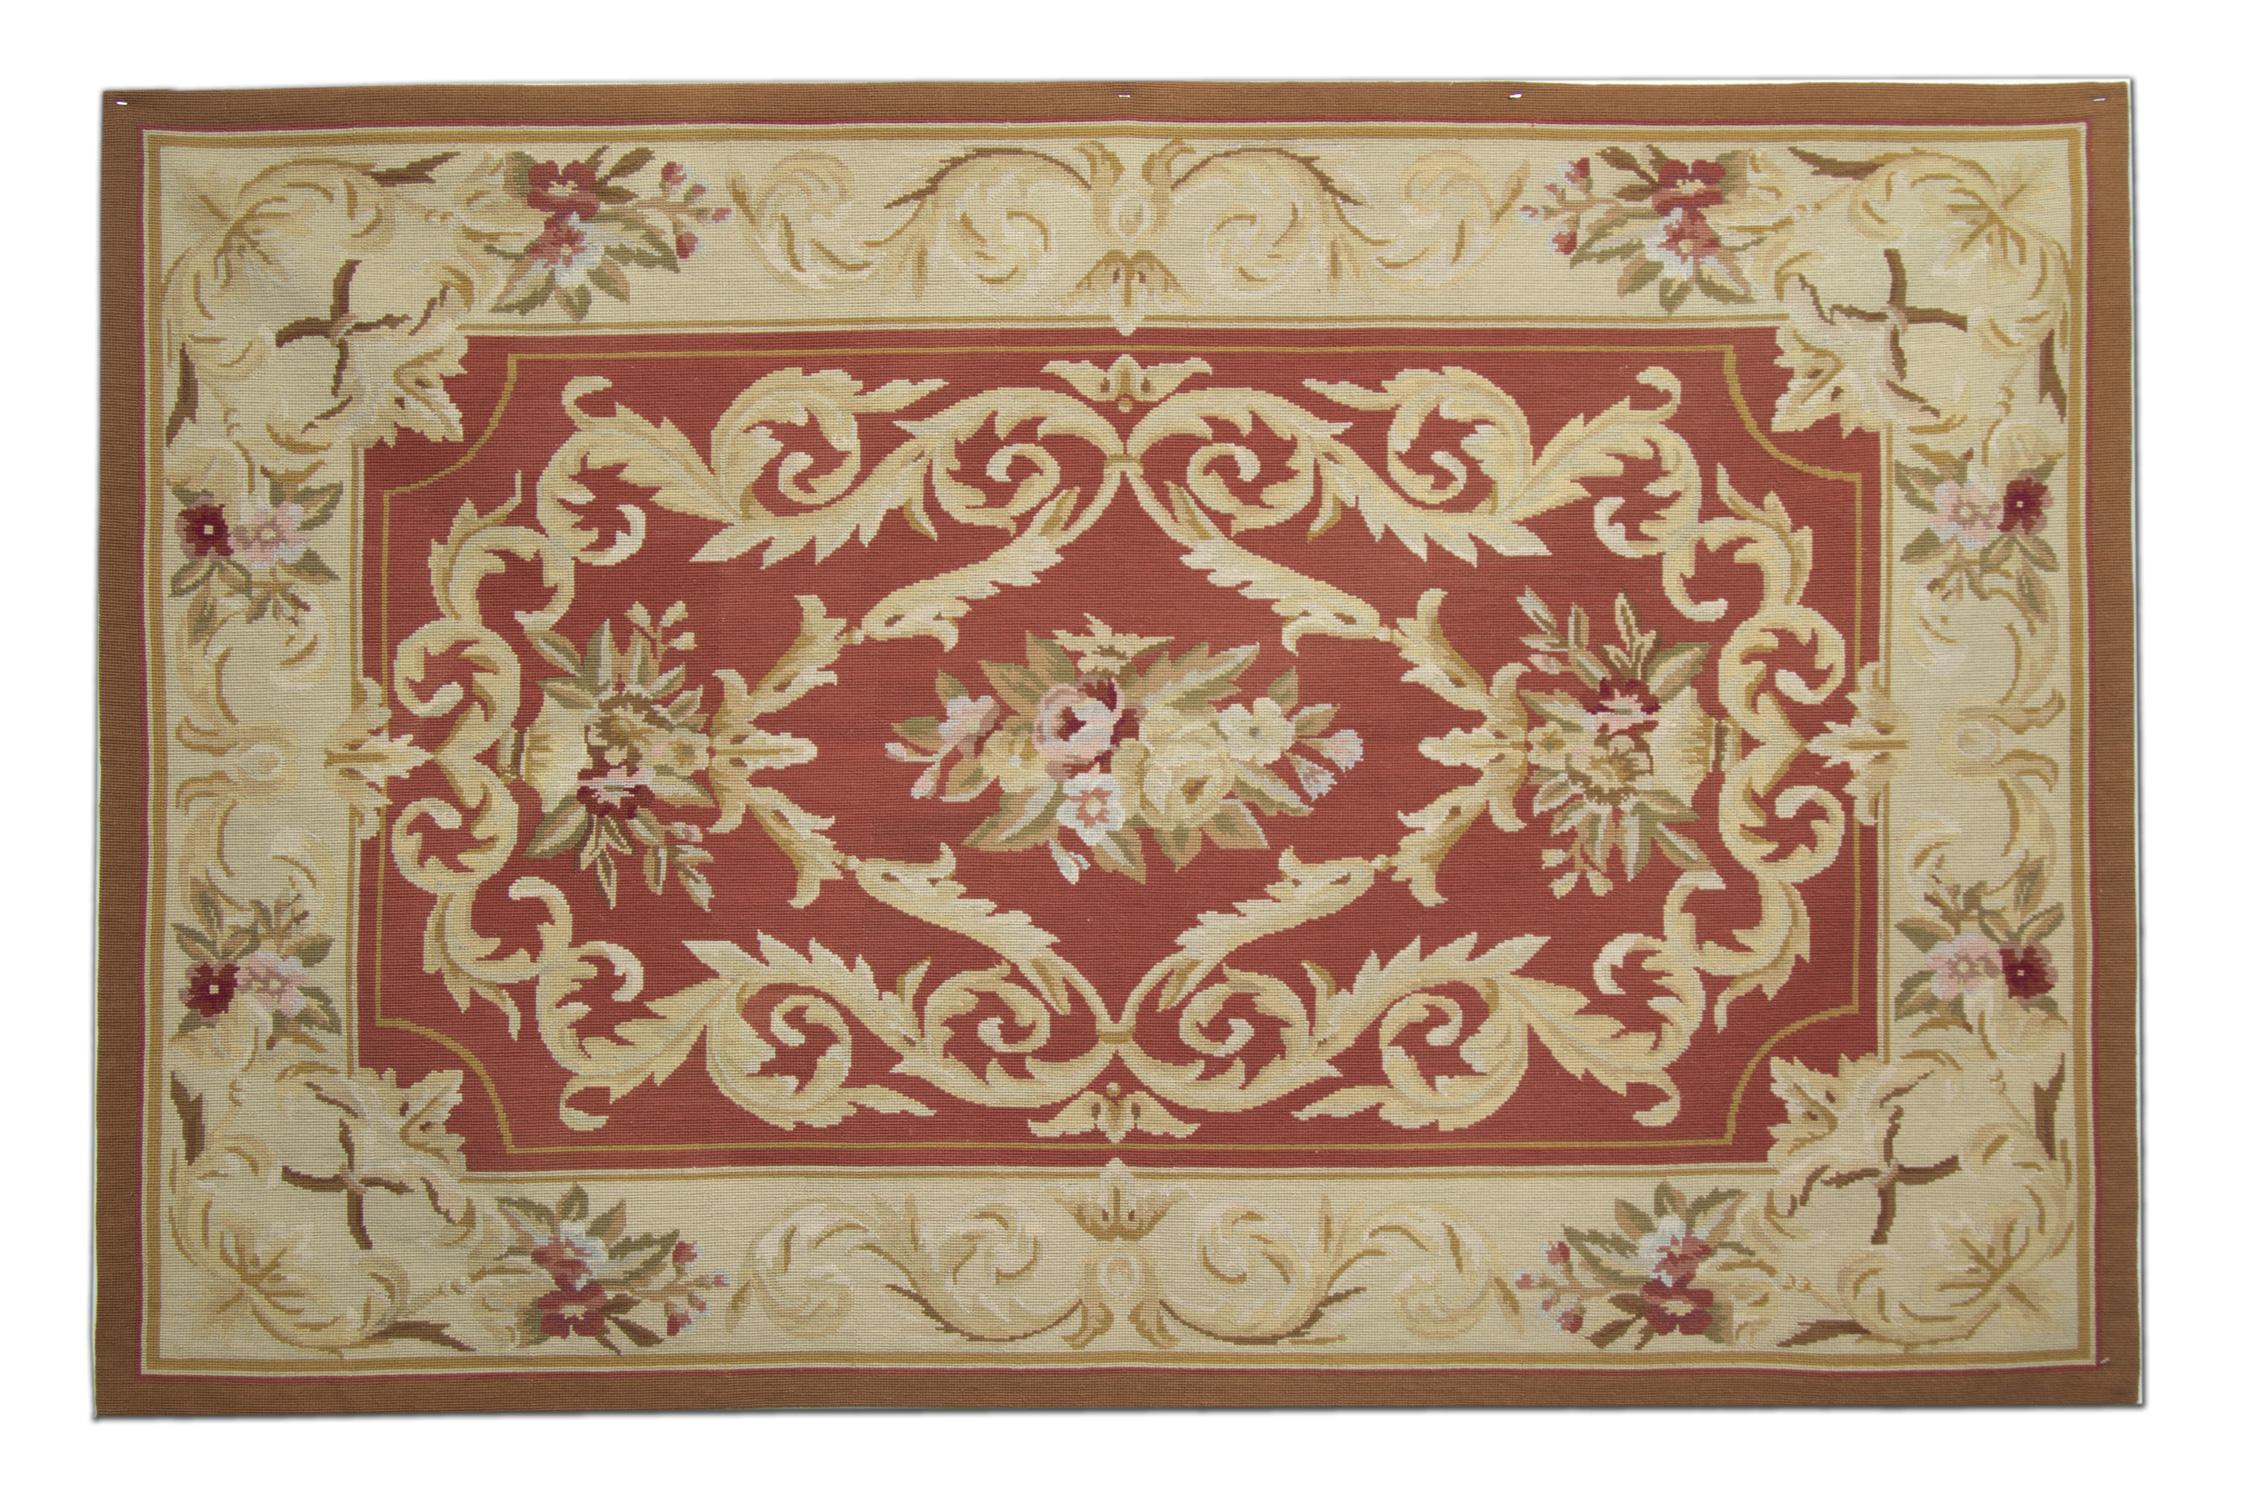 This simple yet elegant needlepoint tapestry has been woven by hand in colors of red and beige. The central design has been woven on a rust-red background and features a symmetrical floral medallion. This is then framed by a detailed beige cream